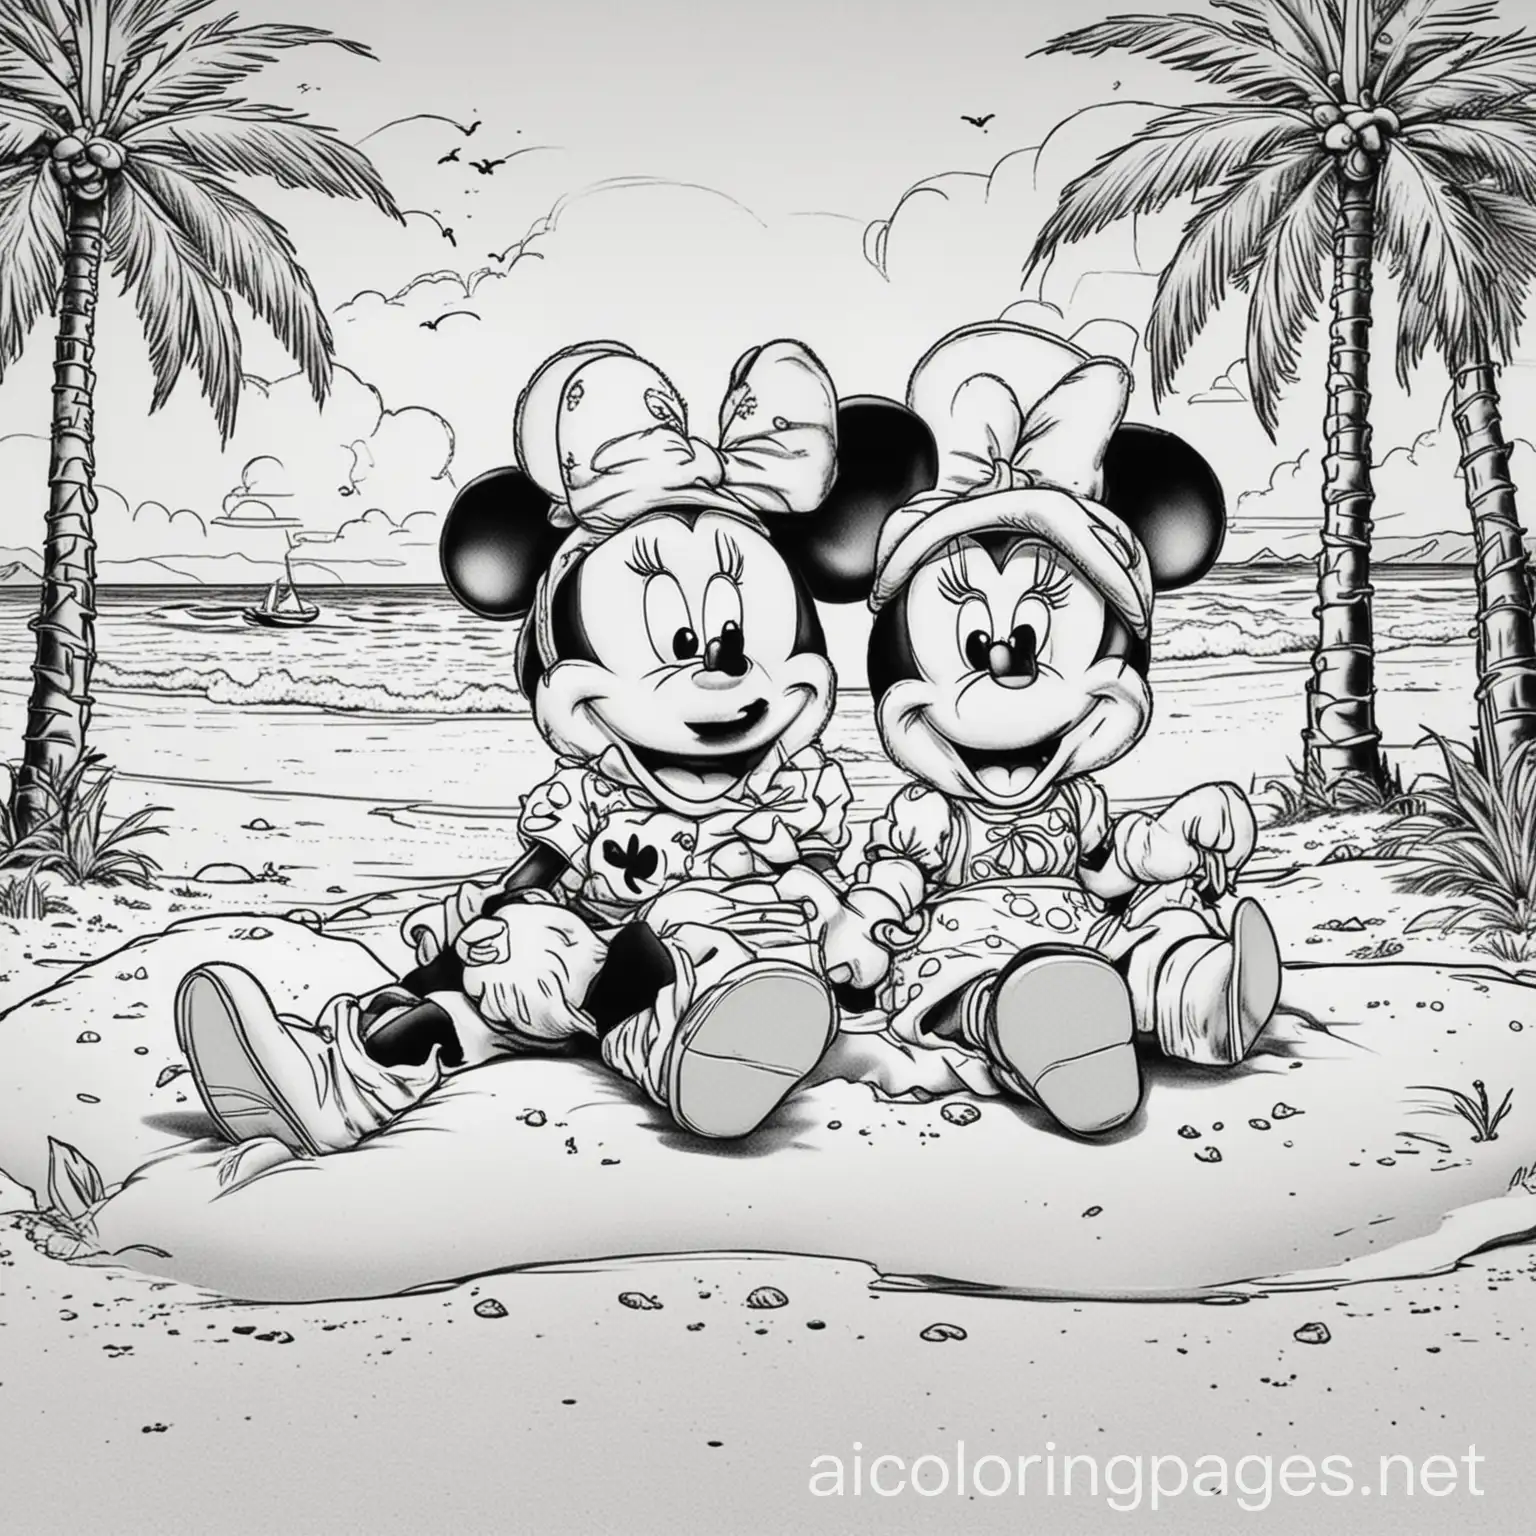 Mickey-and-Minnie-Mouse-Beach-Coloring-Page-Palm-Trees-and-Sand